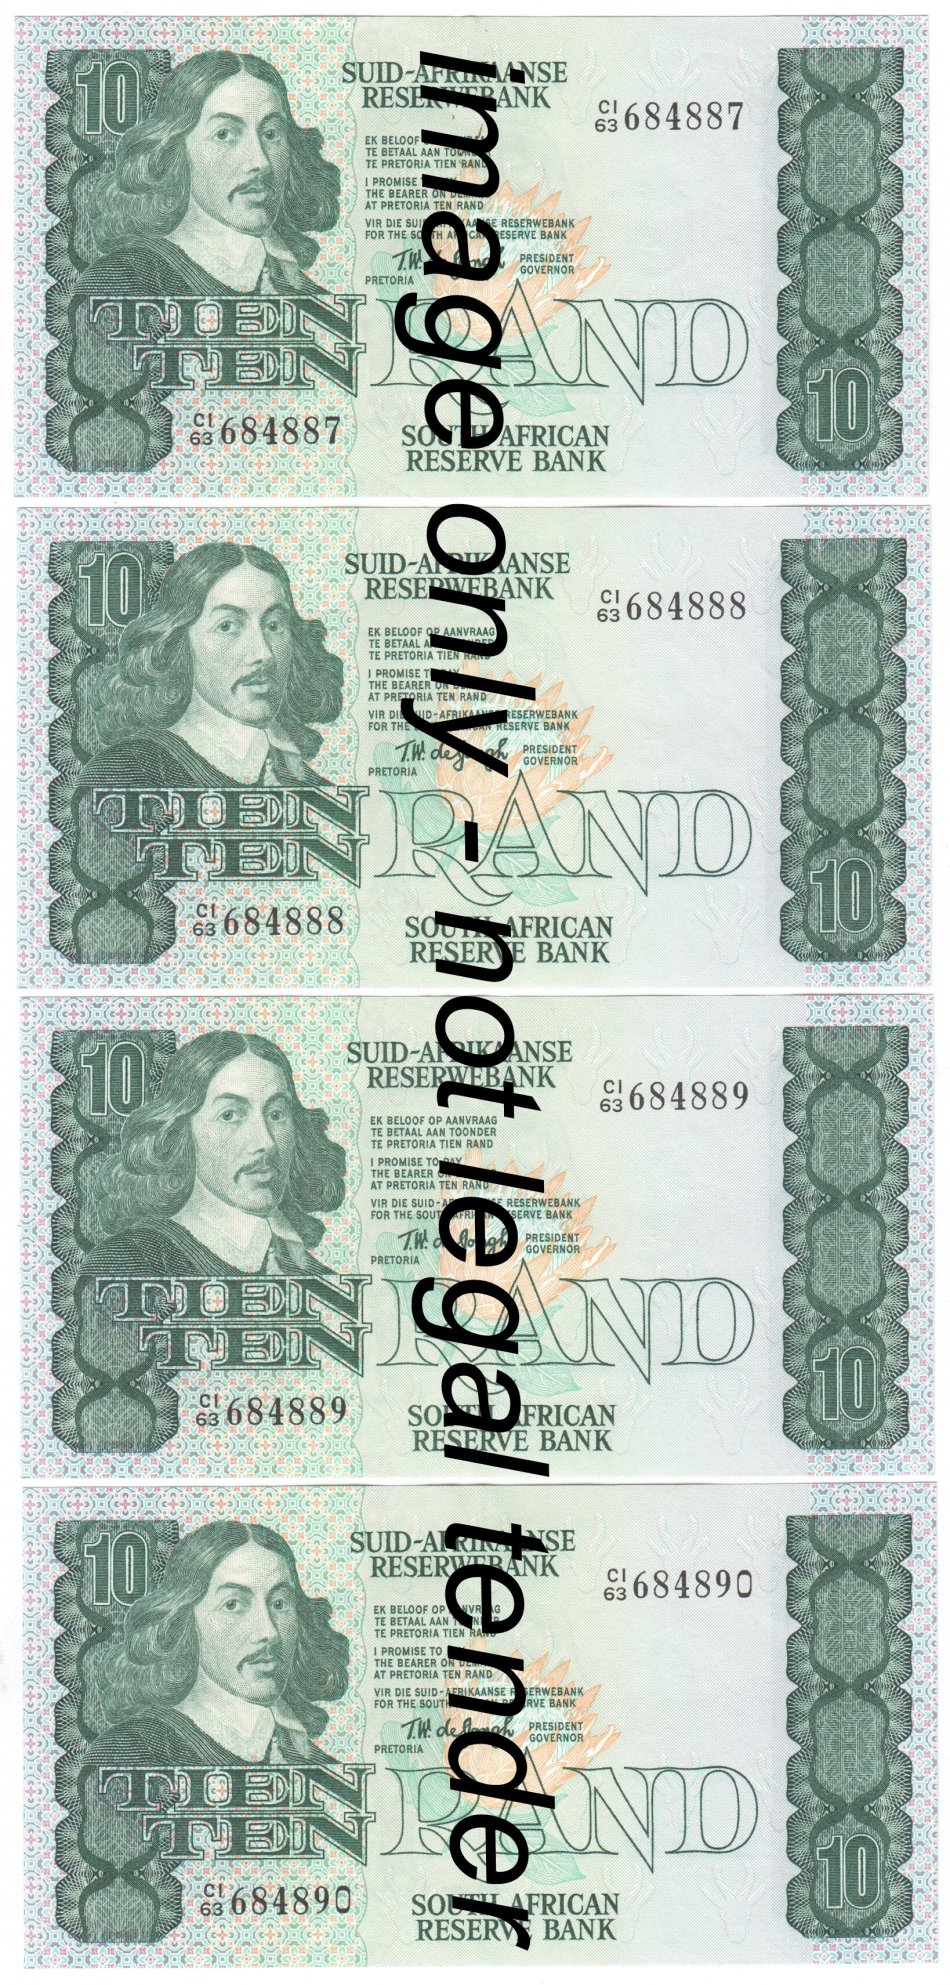 TW de Jongh 4th Issue Lot of 4 uncirculated R10 notes - consecutive numbers C1/63